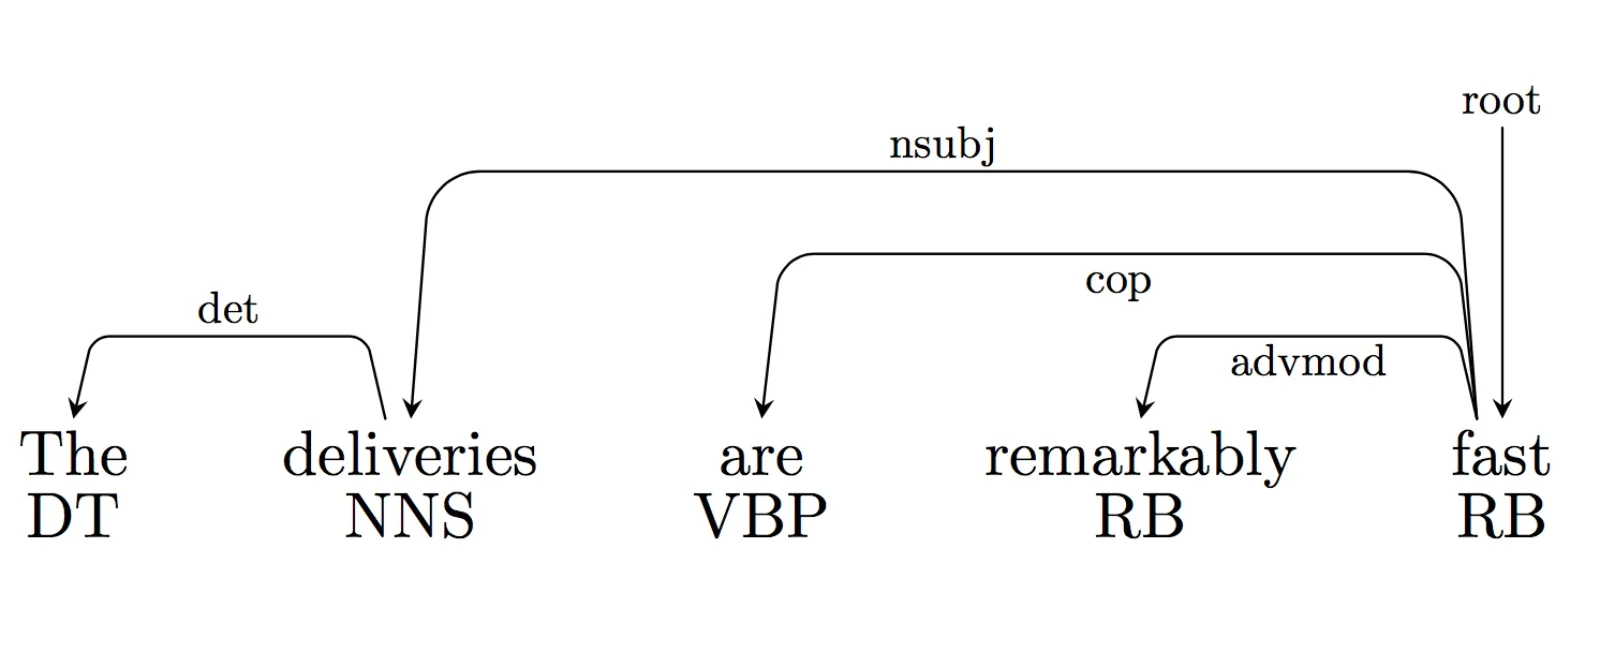 A dependency parse tree. The word "remarkably" has an incoming advmod link, which has the definition: "An adverbial modifier of a word is a (non-clausal) adverb (RB) or adverbial phrase (ADVP) that serves to modify the meaning of the word."